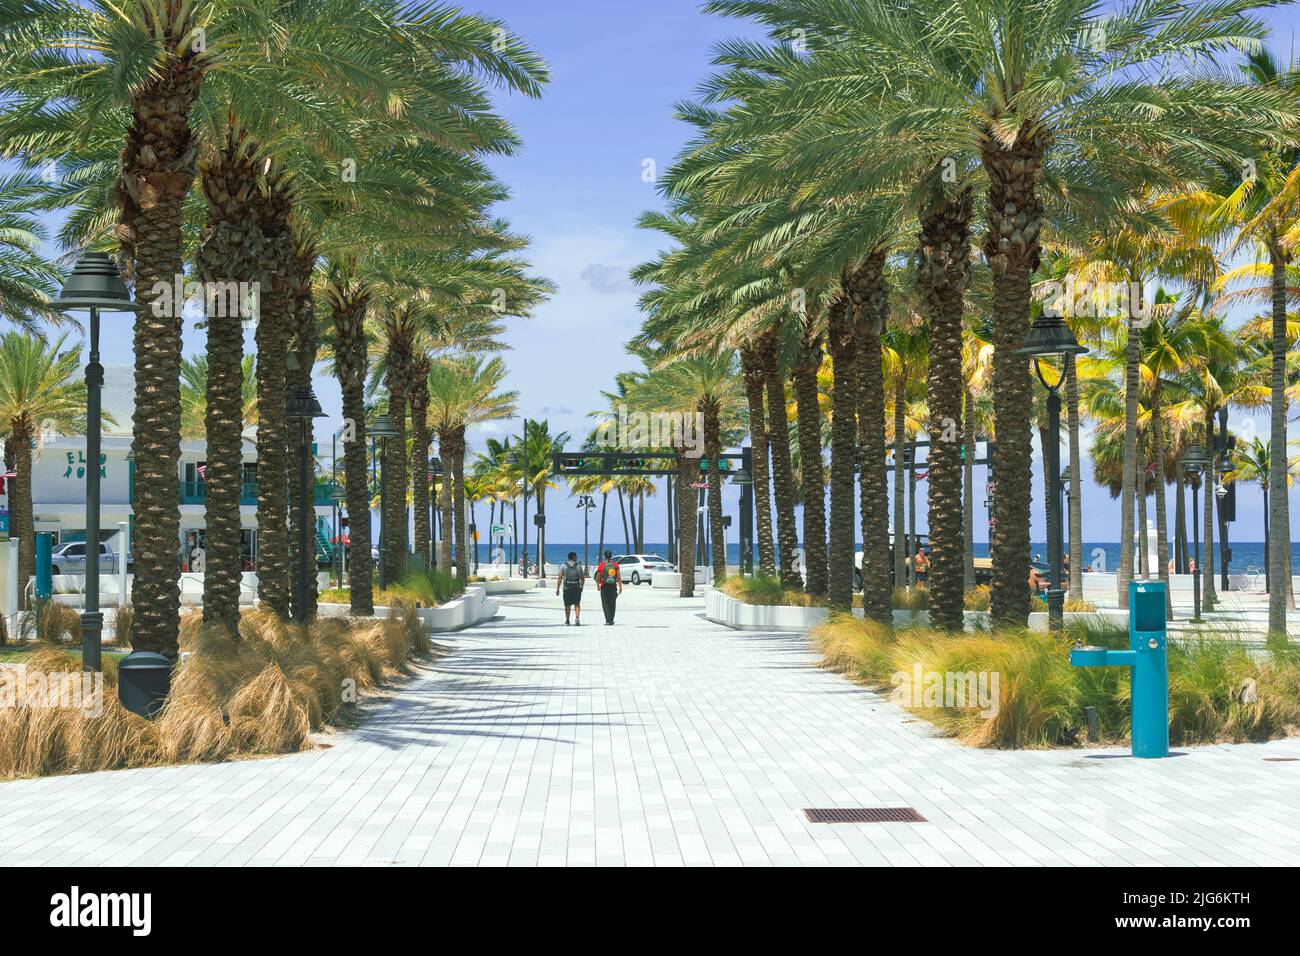 Two people walking on a pathway lined with palm trees at Beach Las Olas Oceanside Beach Fort Lauderdale Stock Photo